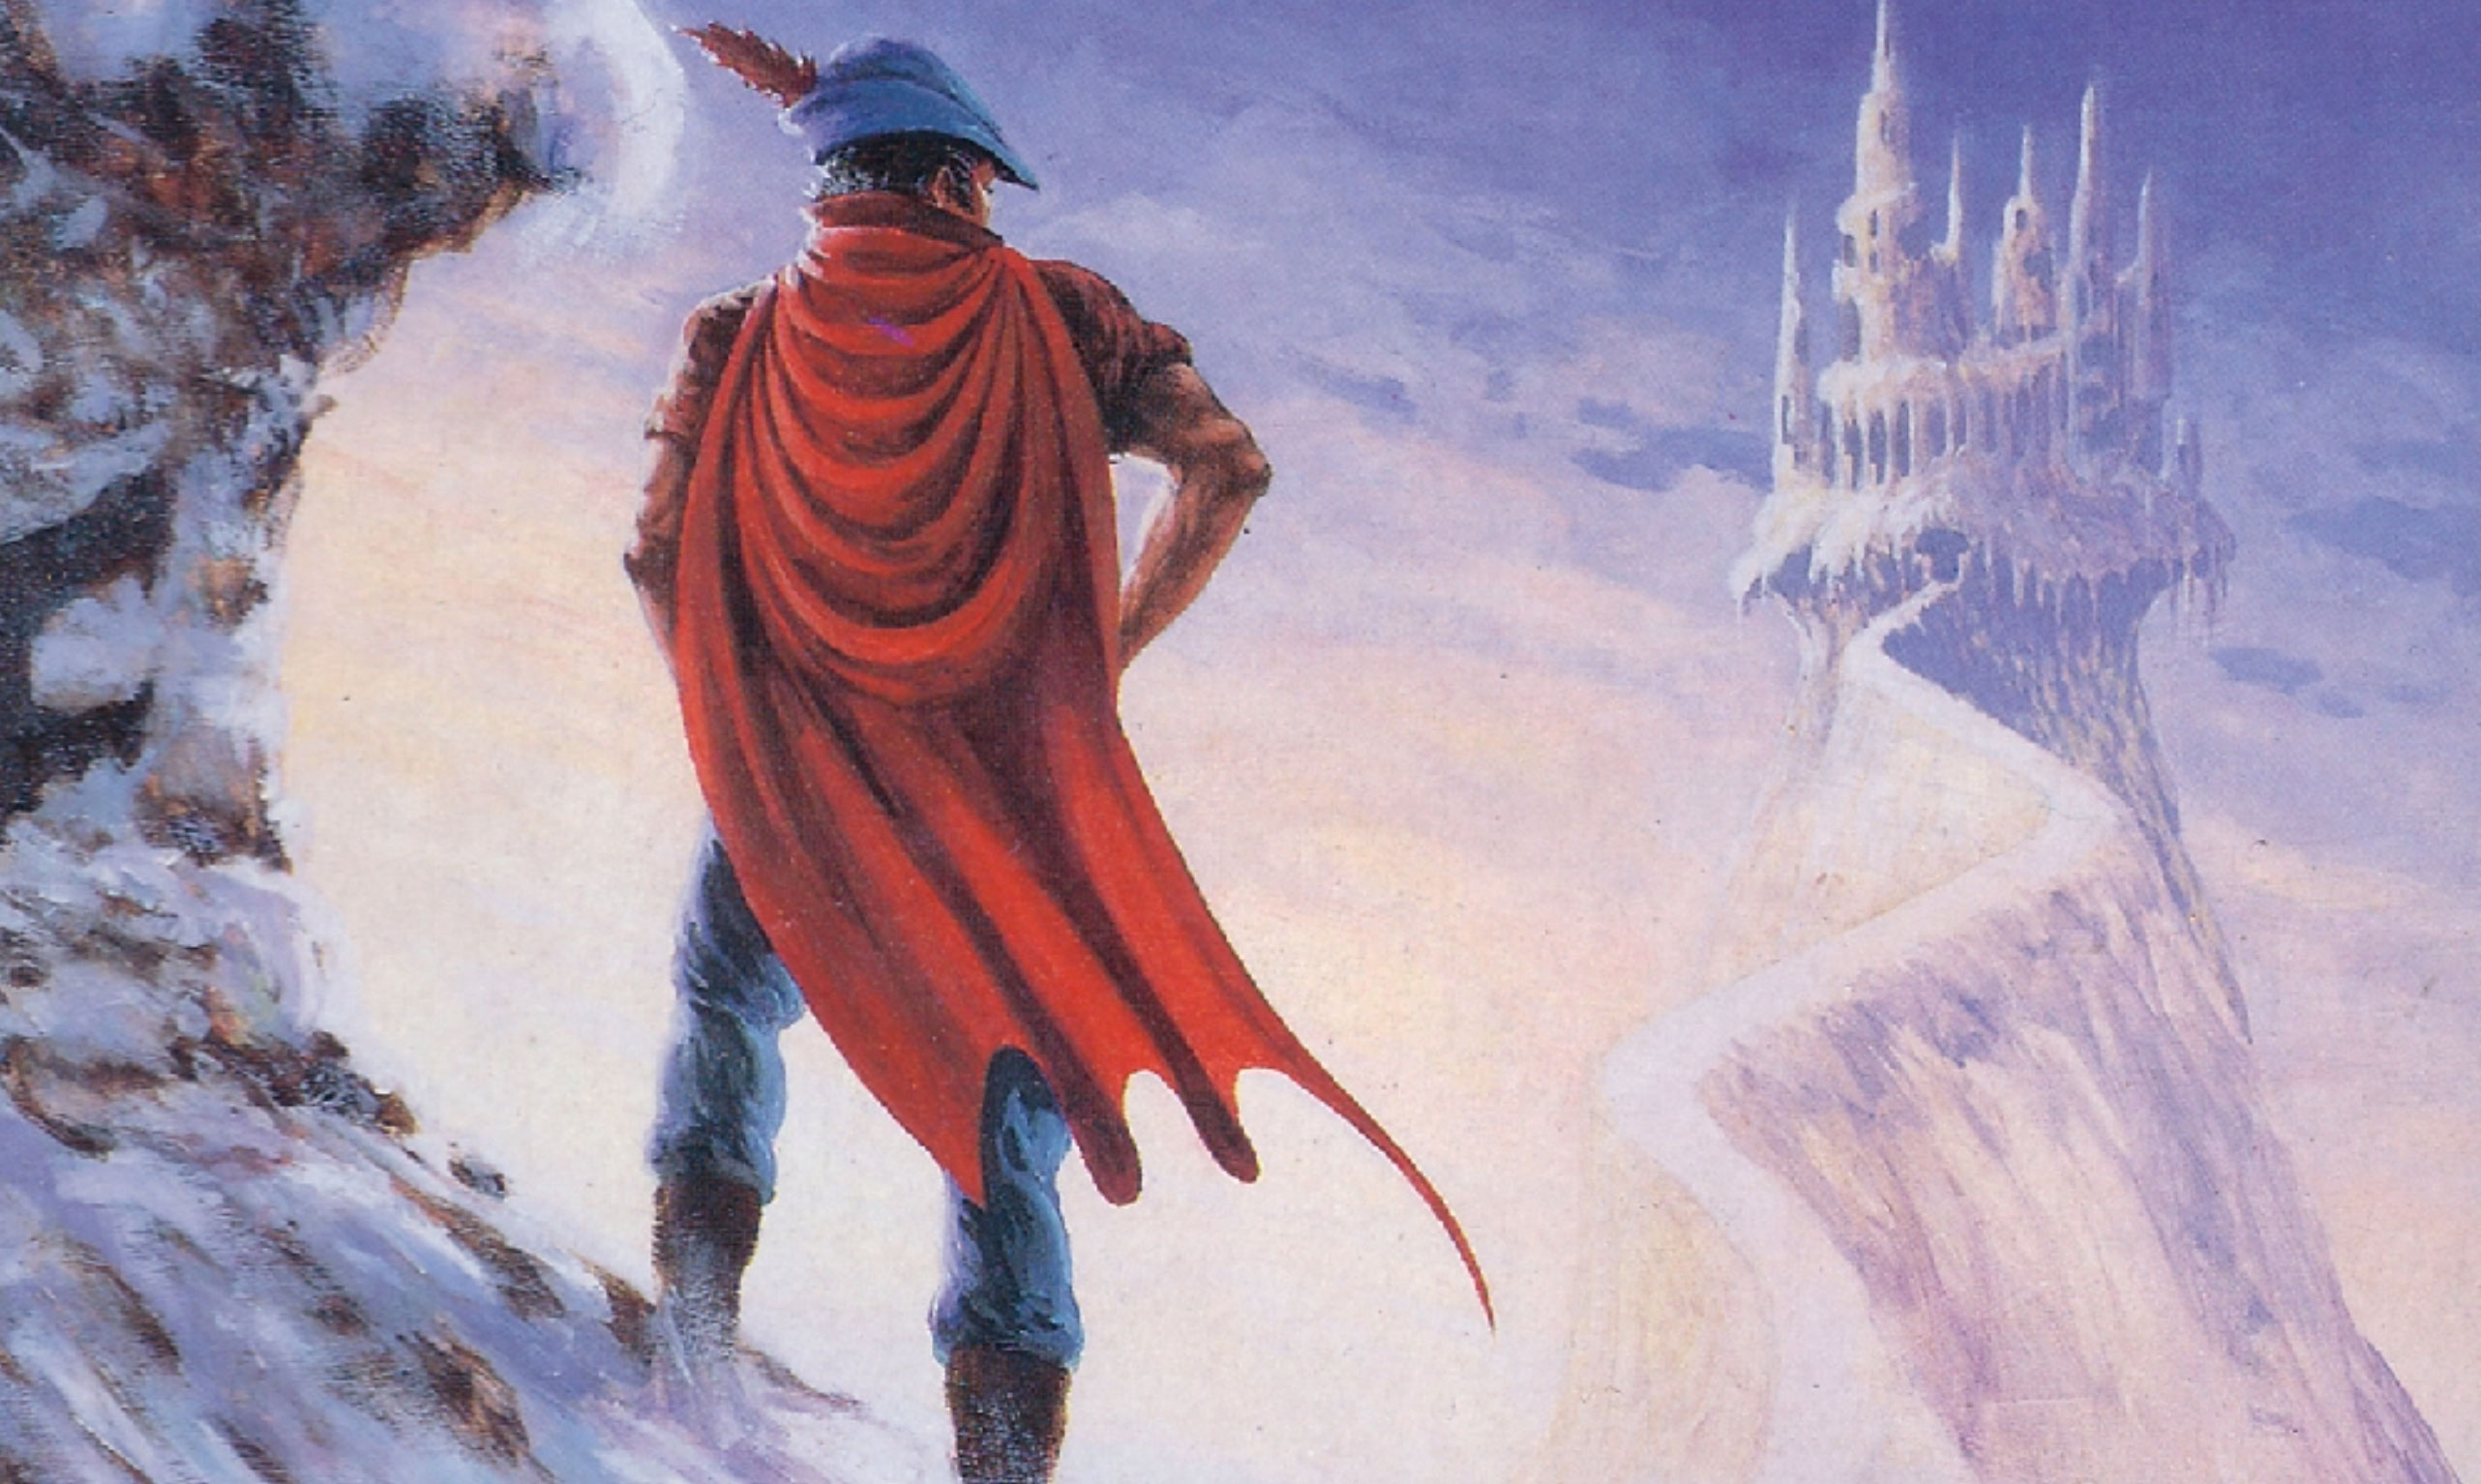 graphic adventure games - THE KING'S QUEST SERIES